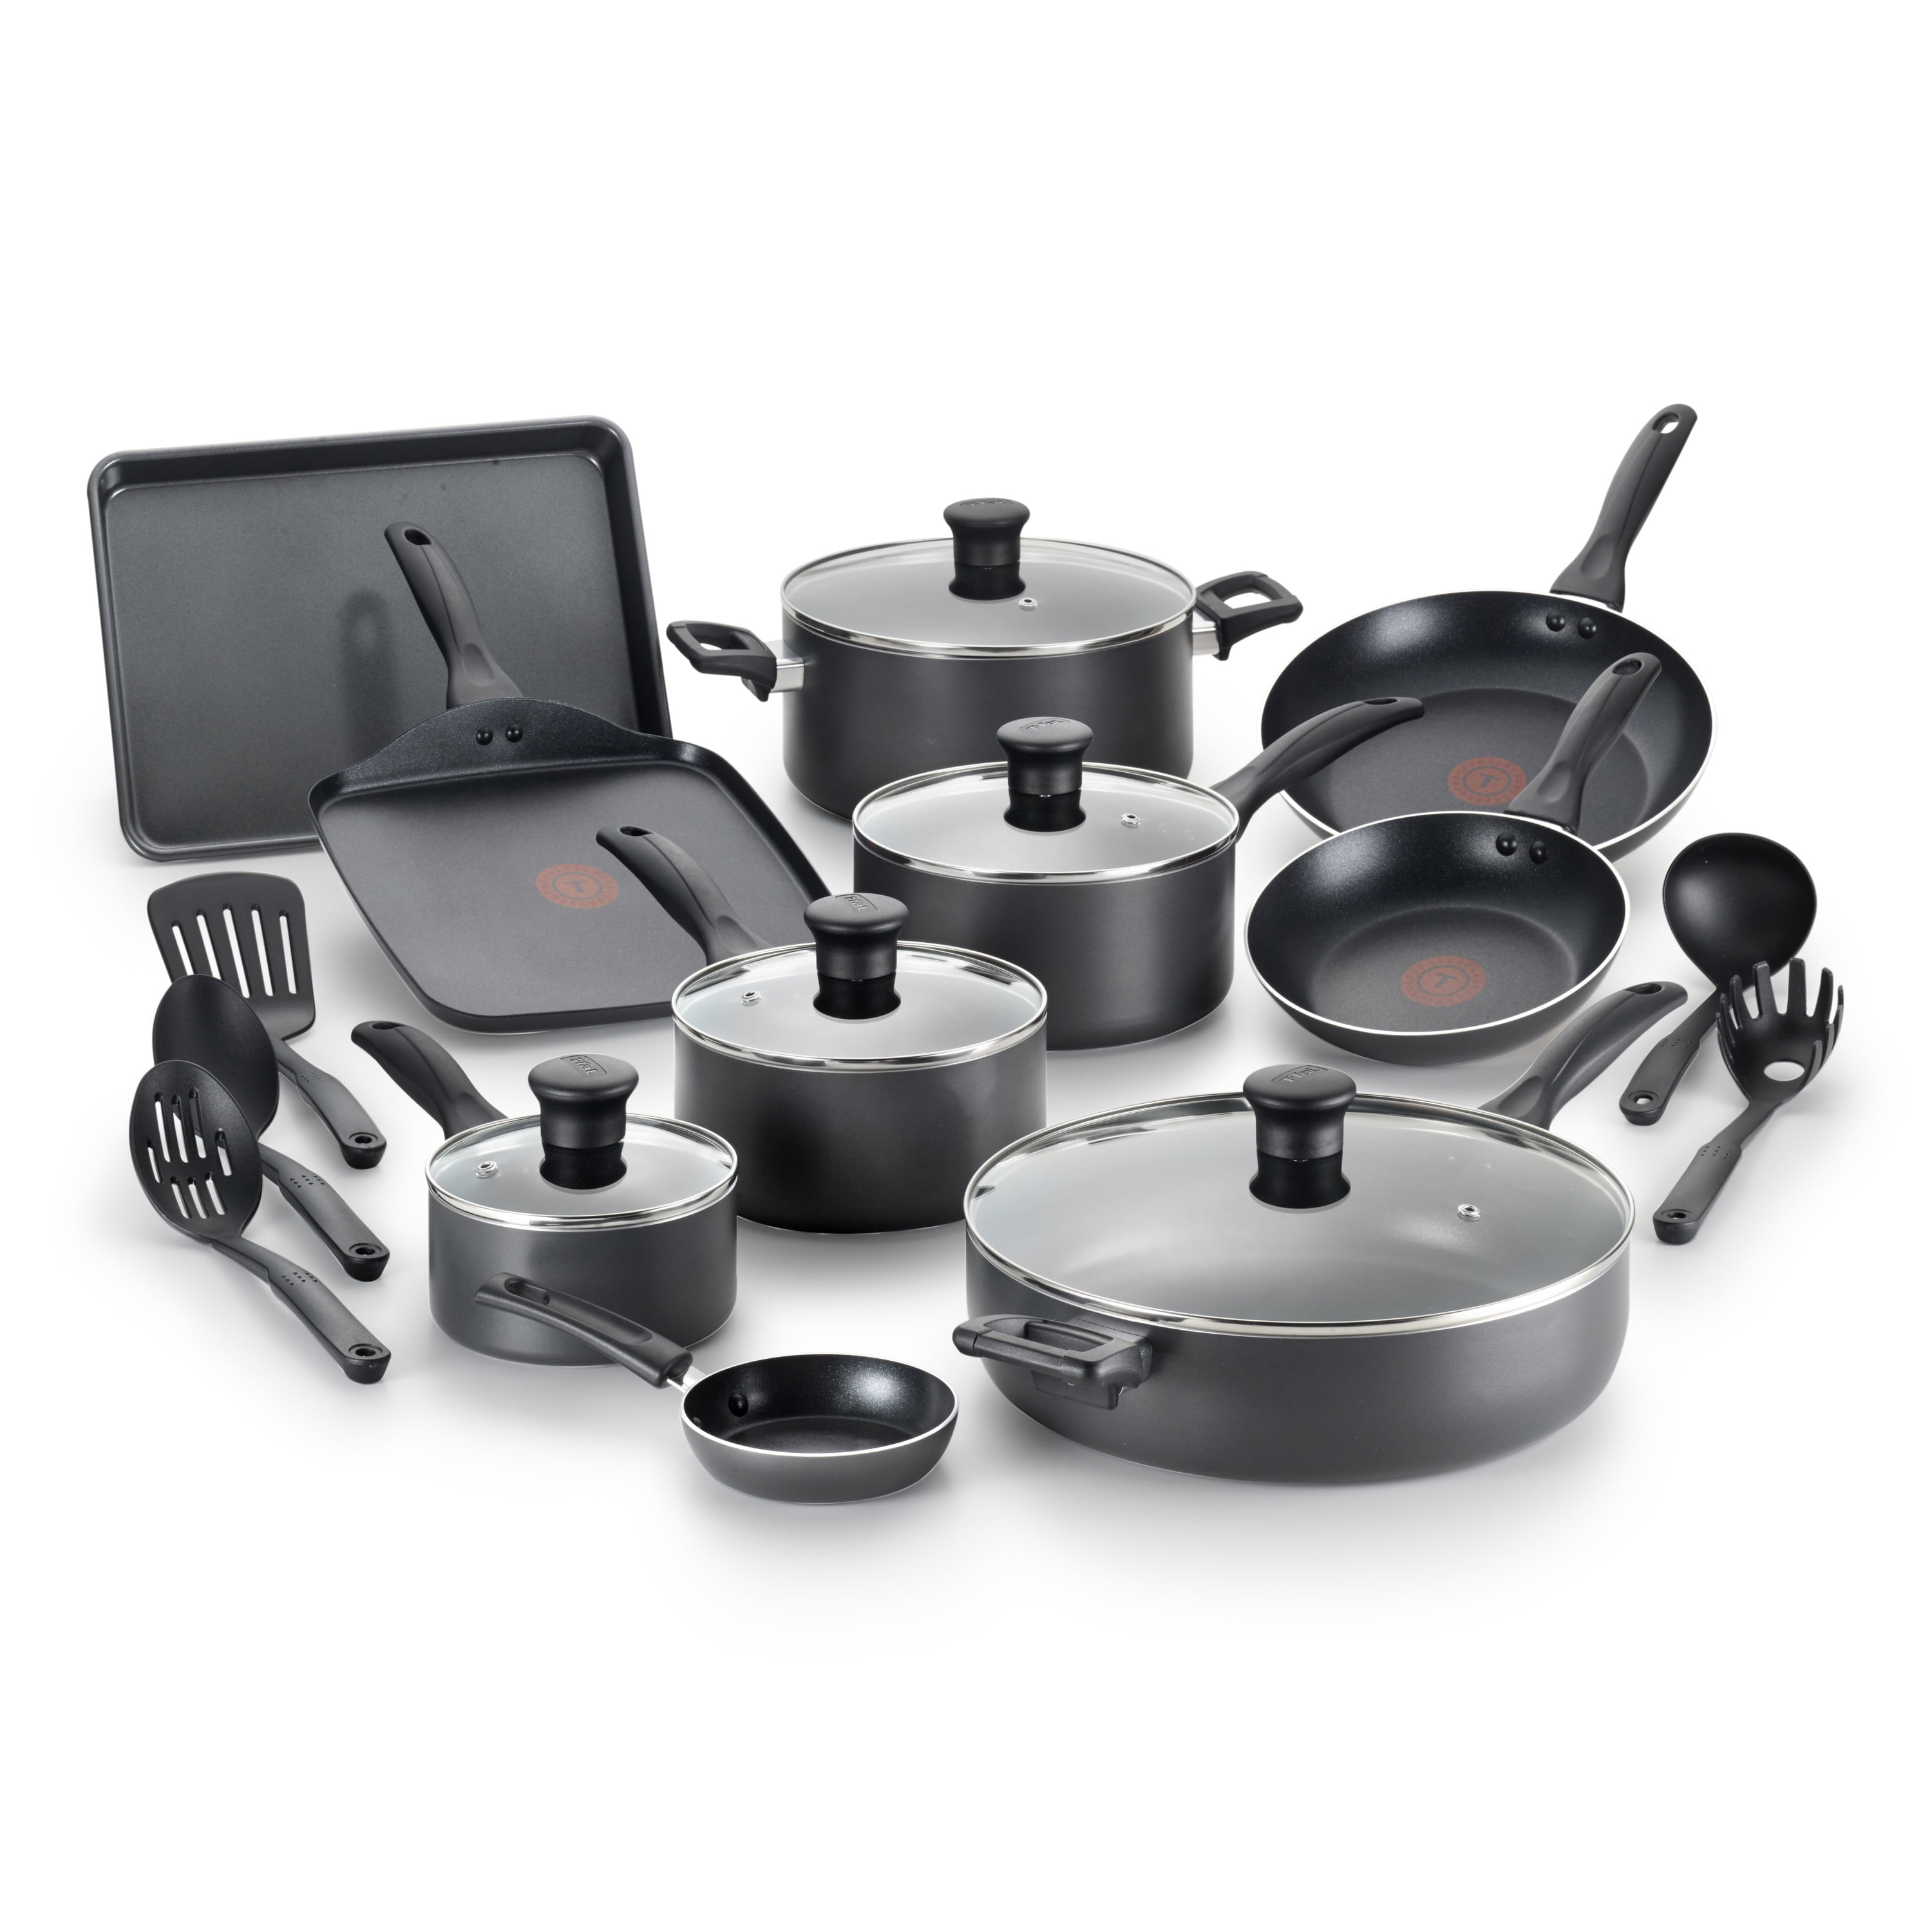 T-fal Natura Nonstick Sauté Pan 9 Inch Induction Cookware, Pots and Pans,  Dishwasher Safe Gray